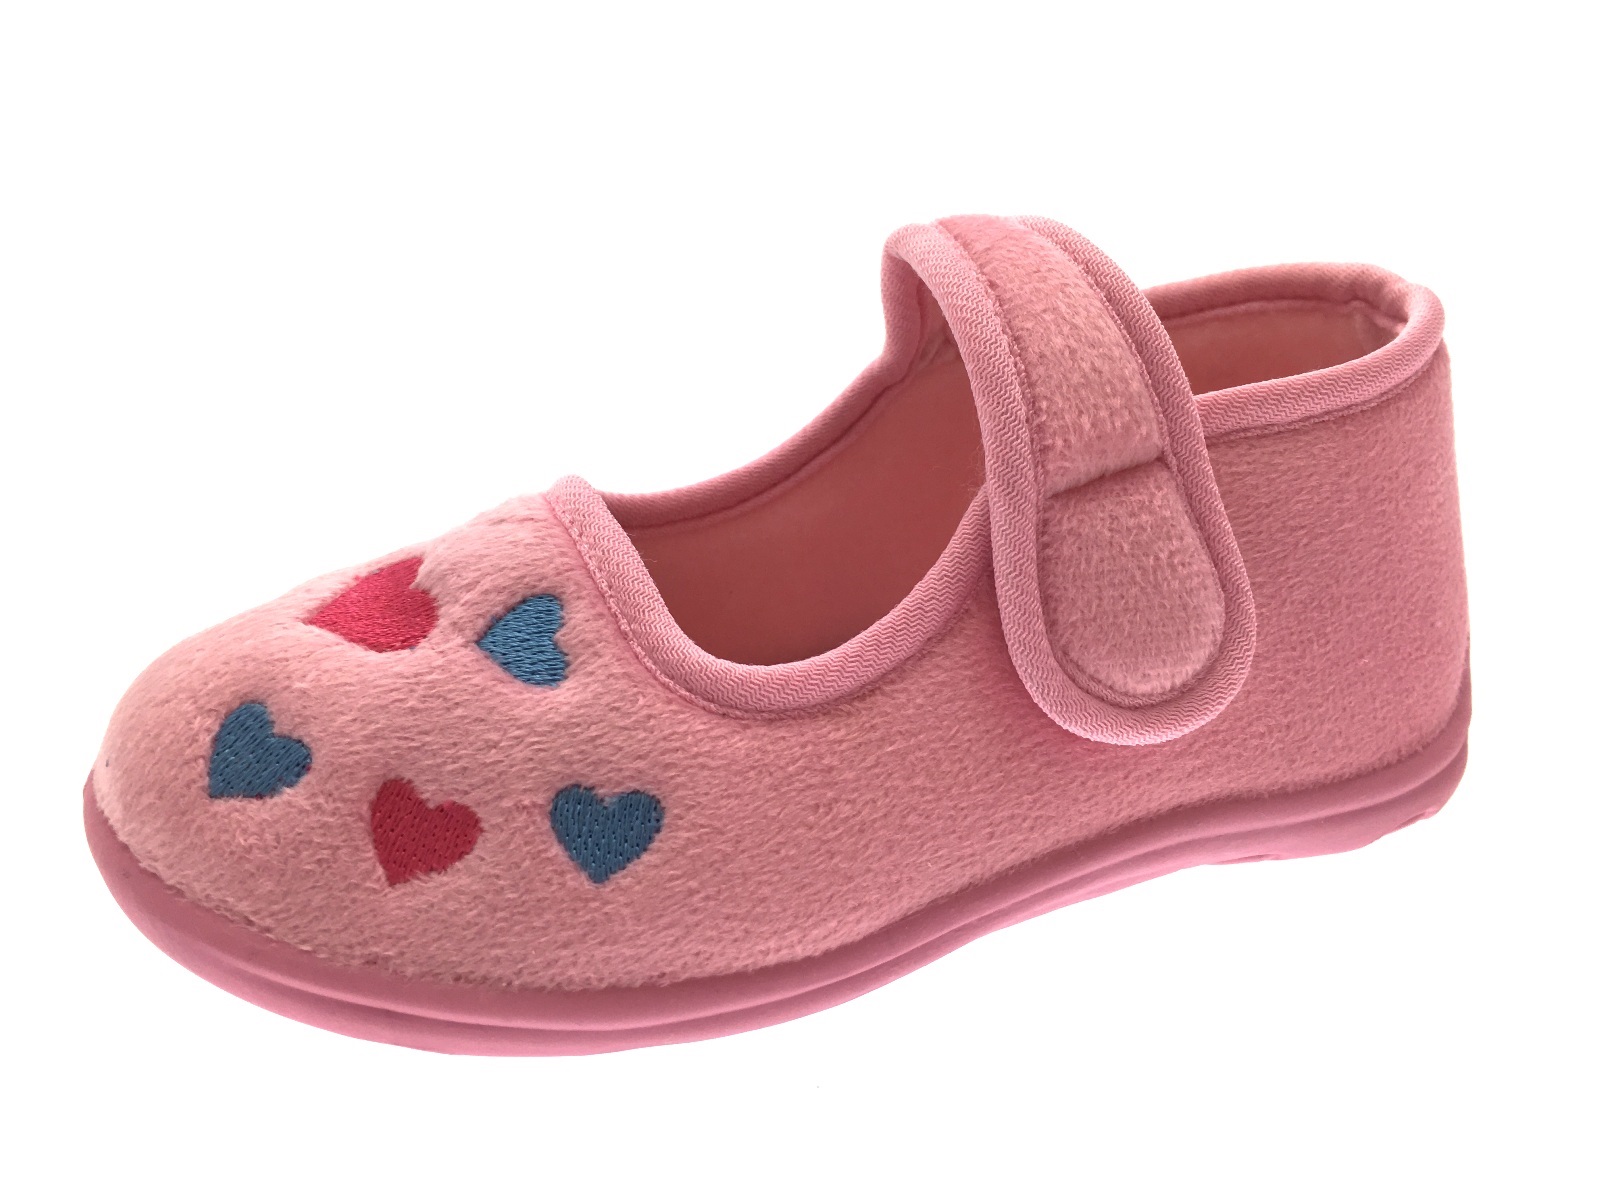 The cute and stylish children’s shoes